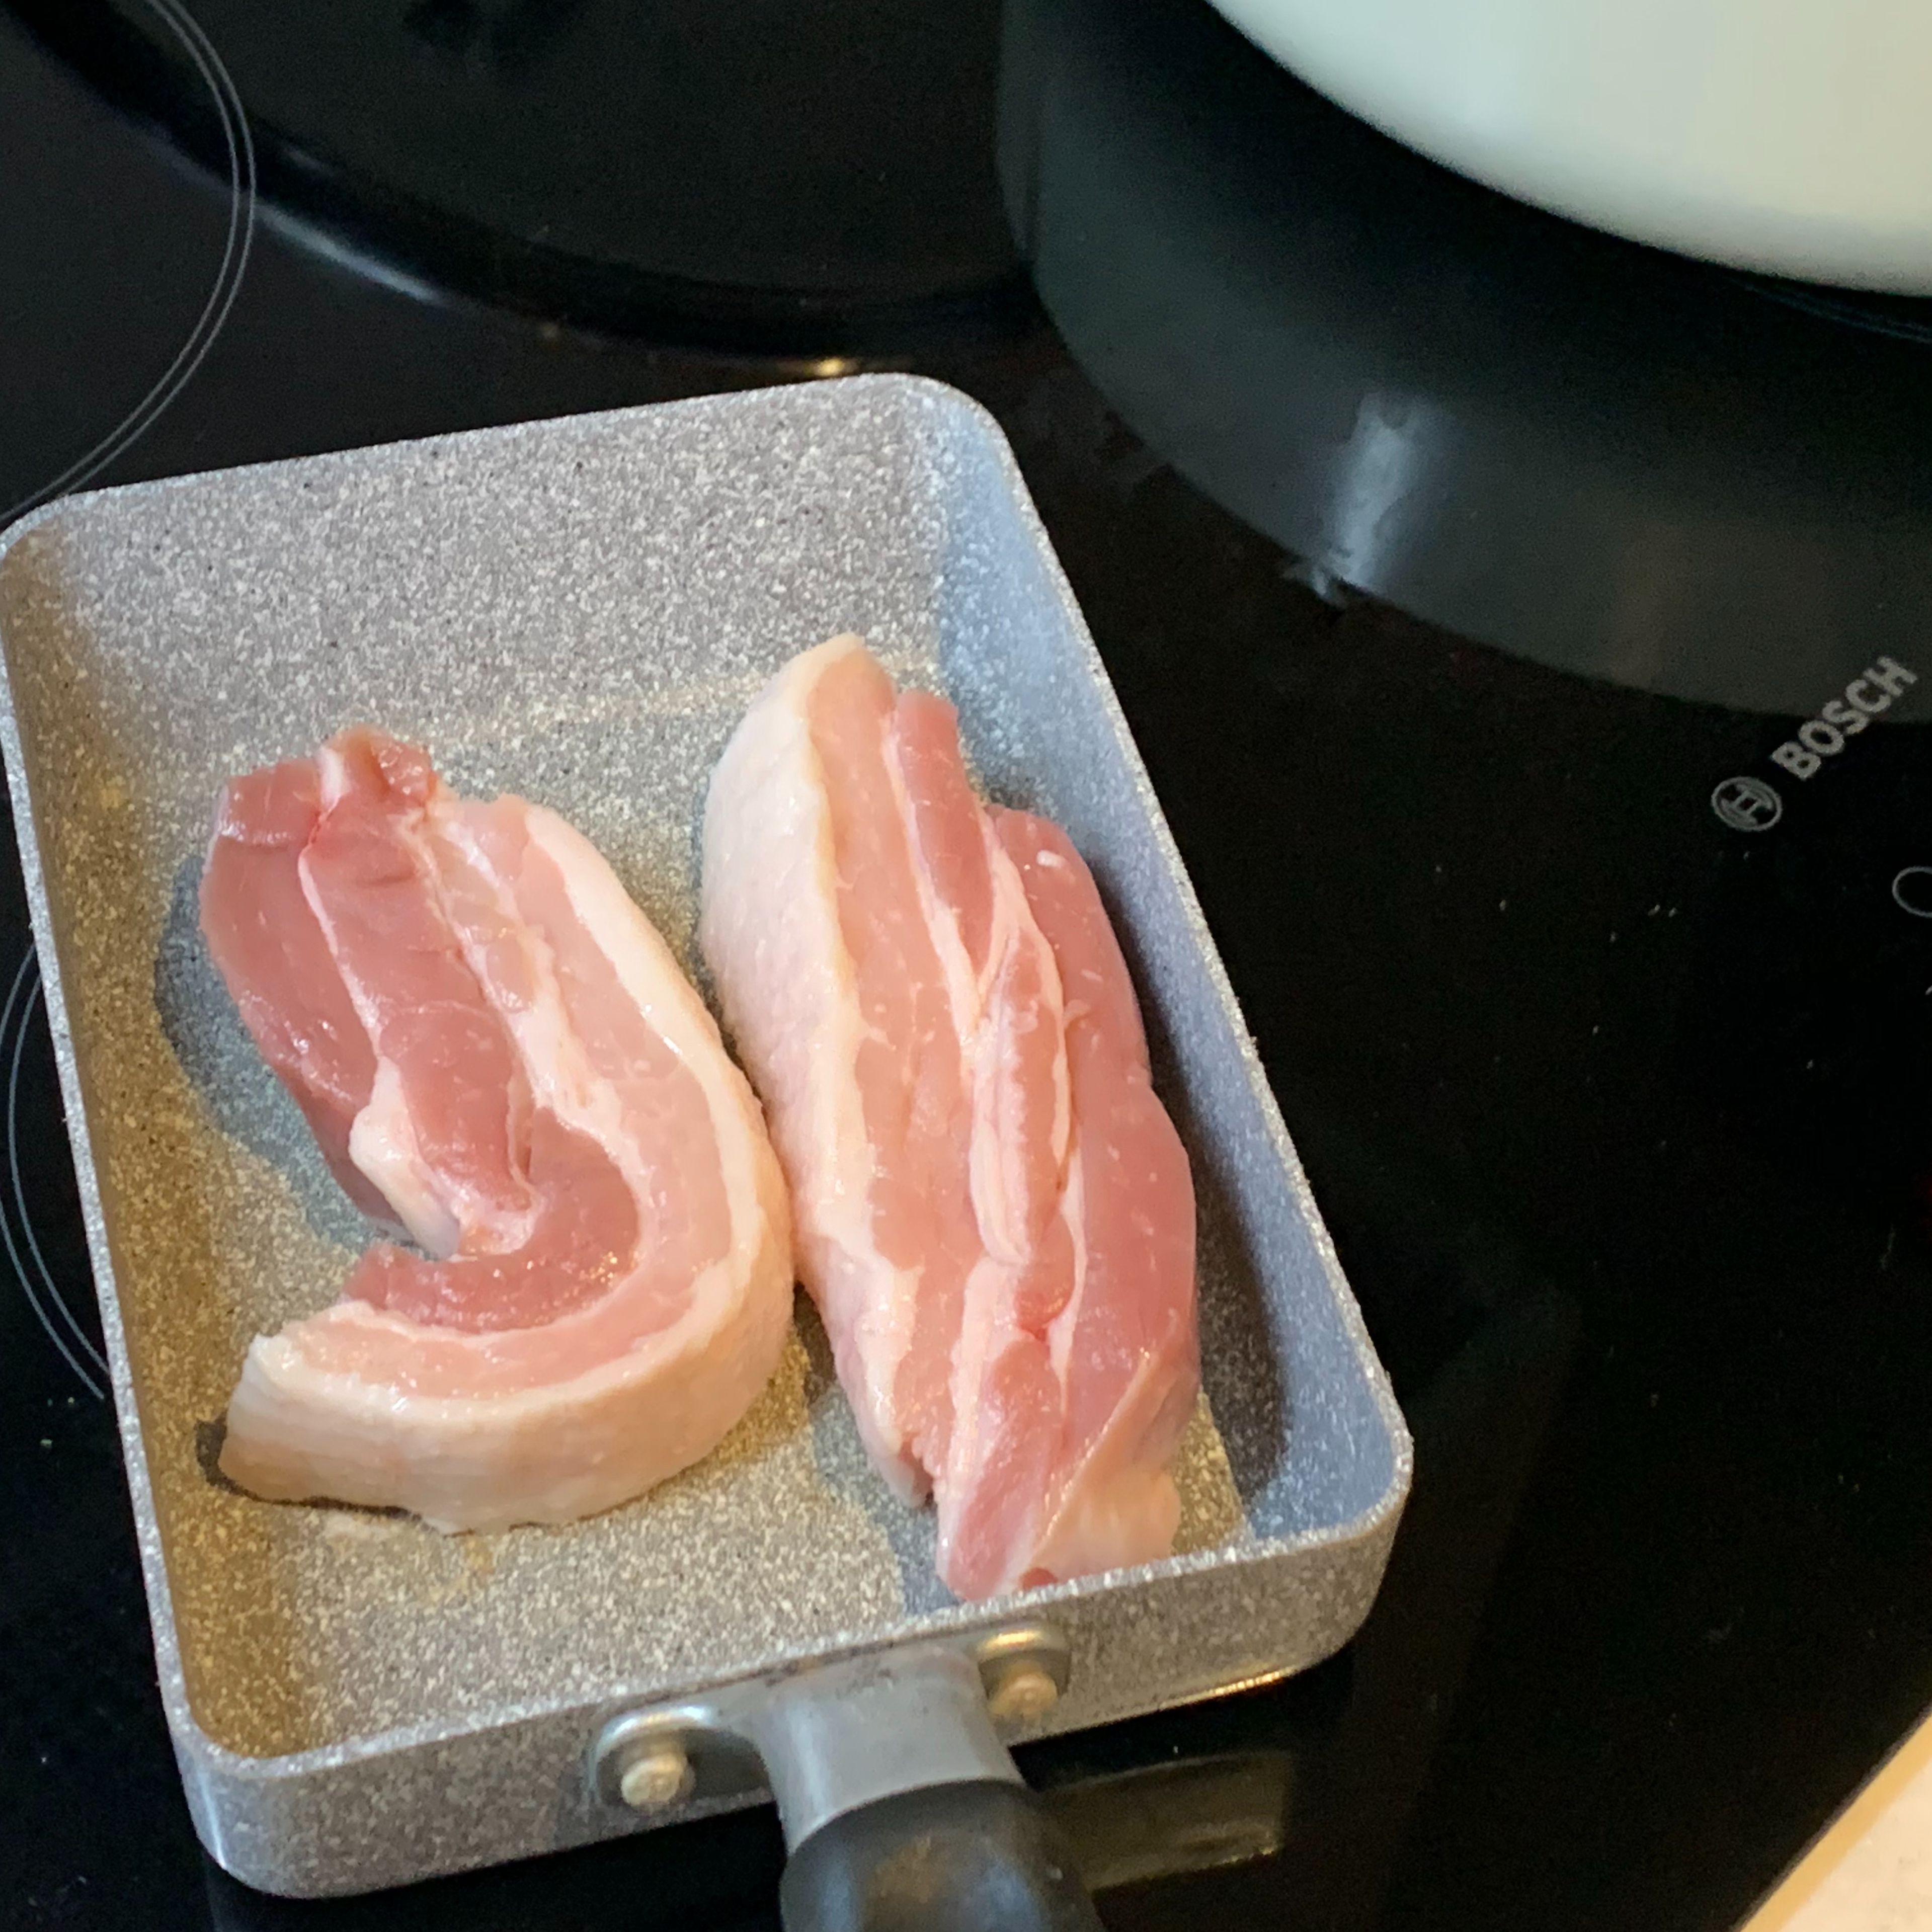 Place the pork belly slices onto a heated frying pan without oil.